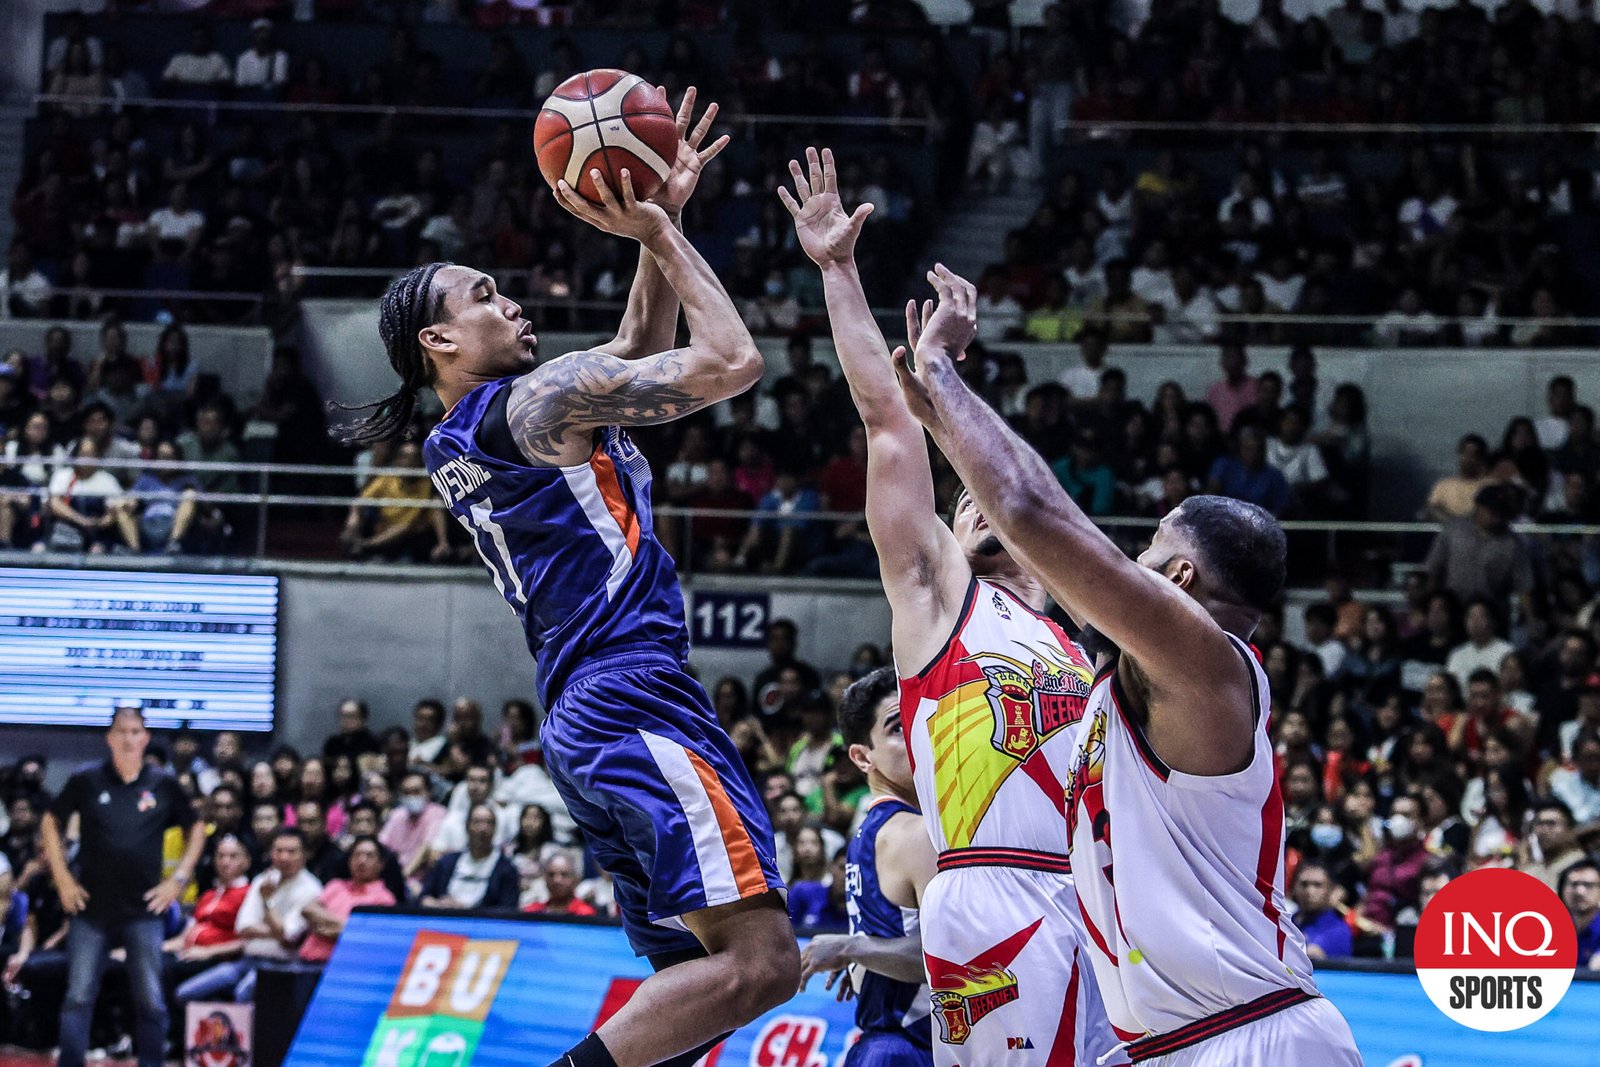 PBA: Newsome’s ‘most significant’ shot seals crowning moment